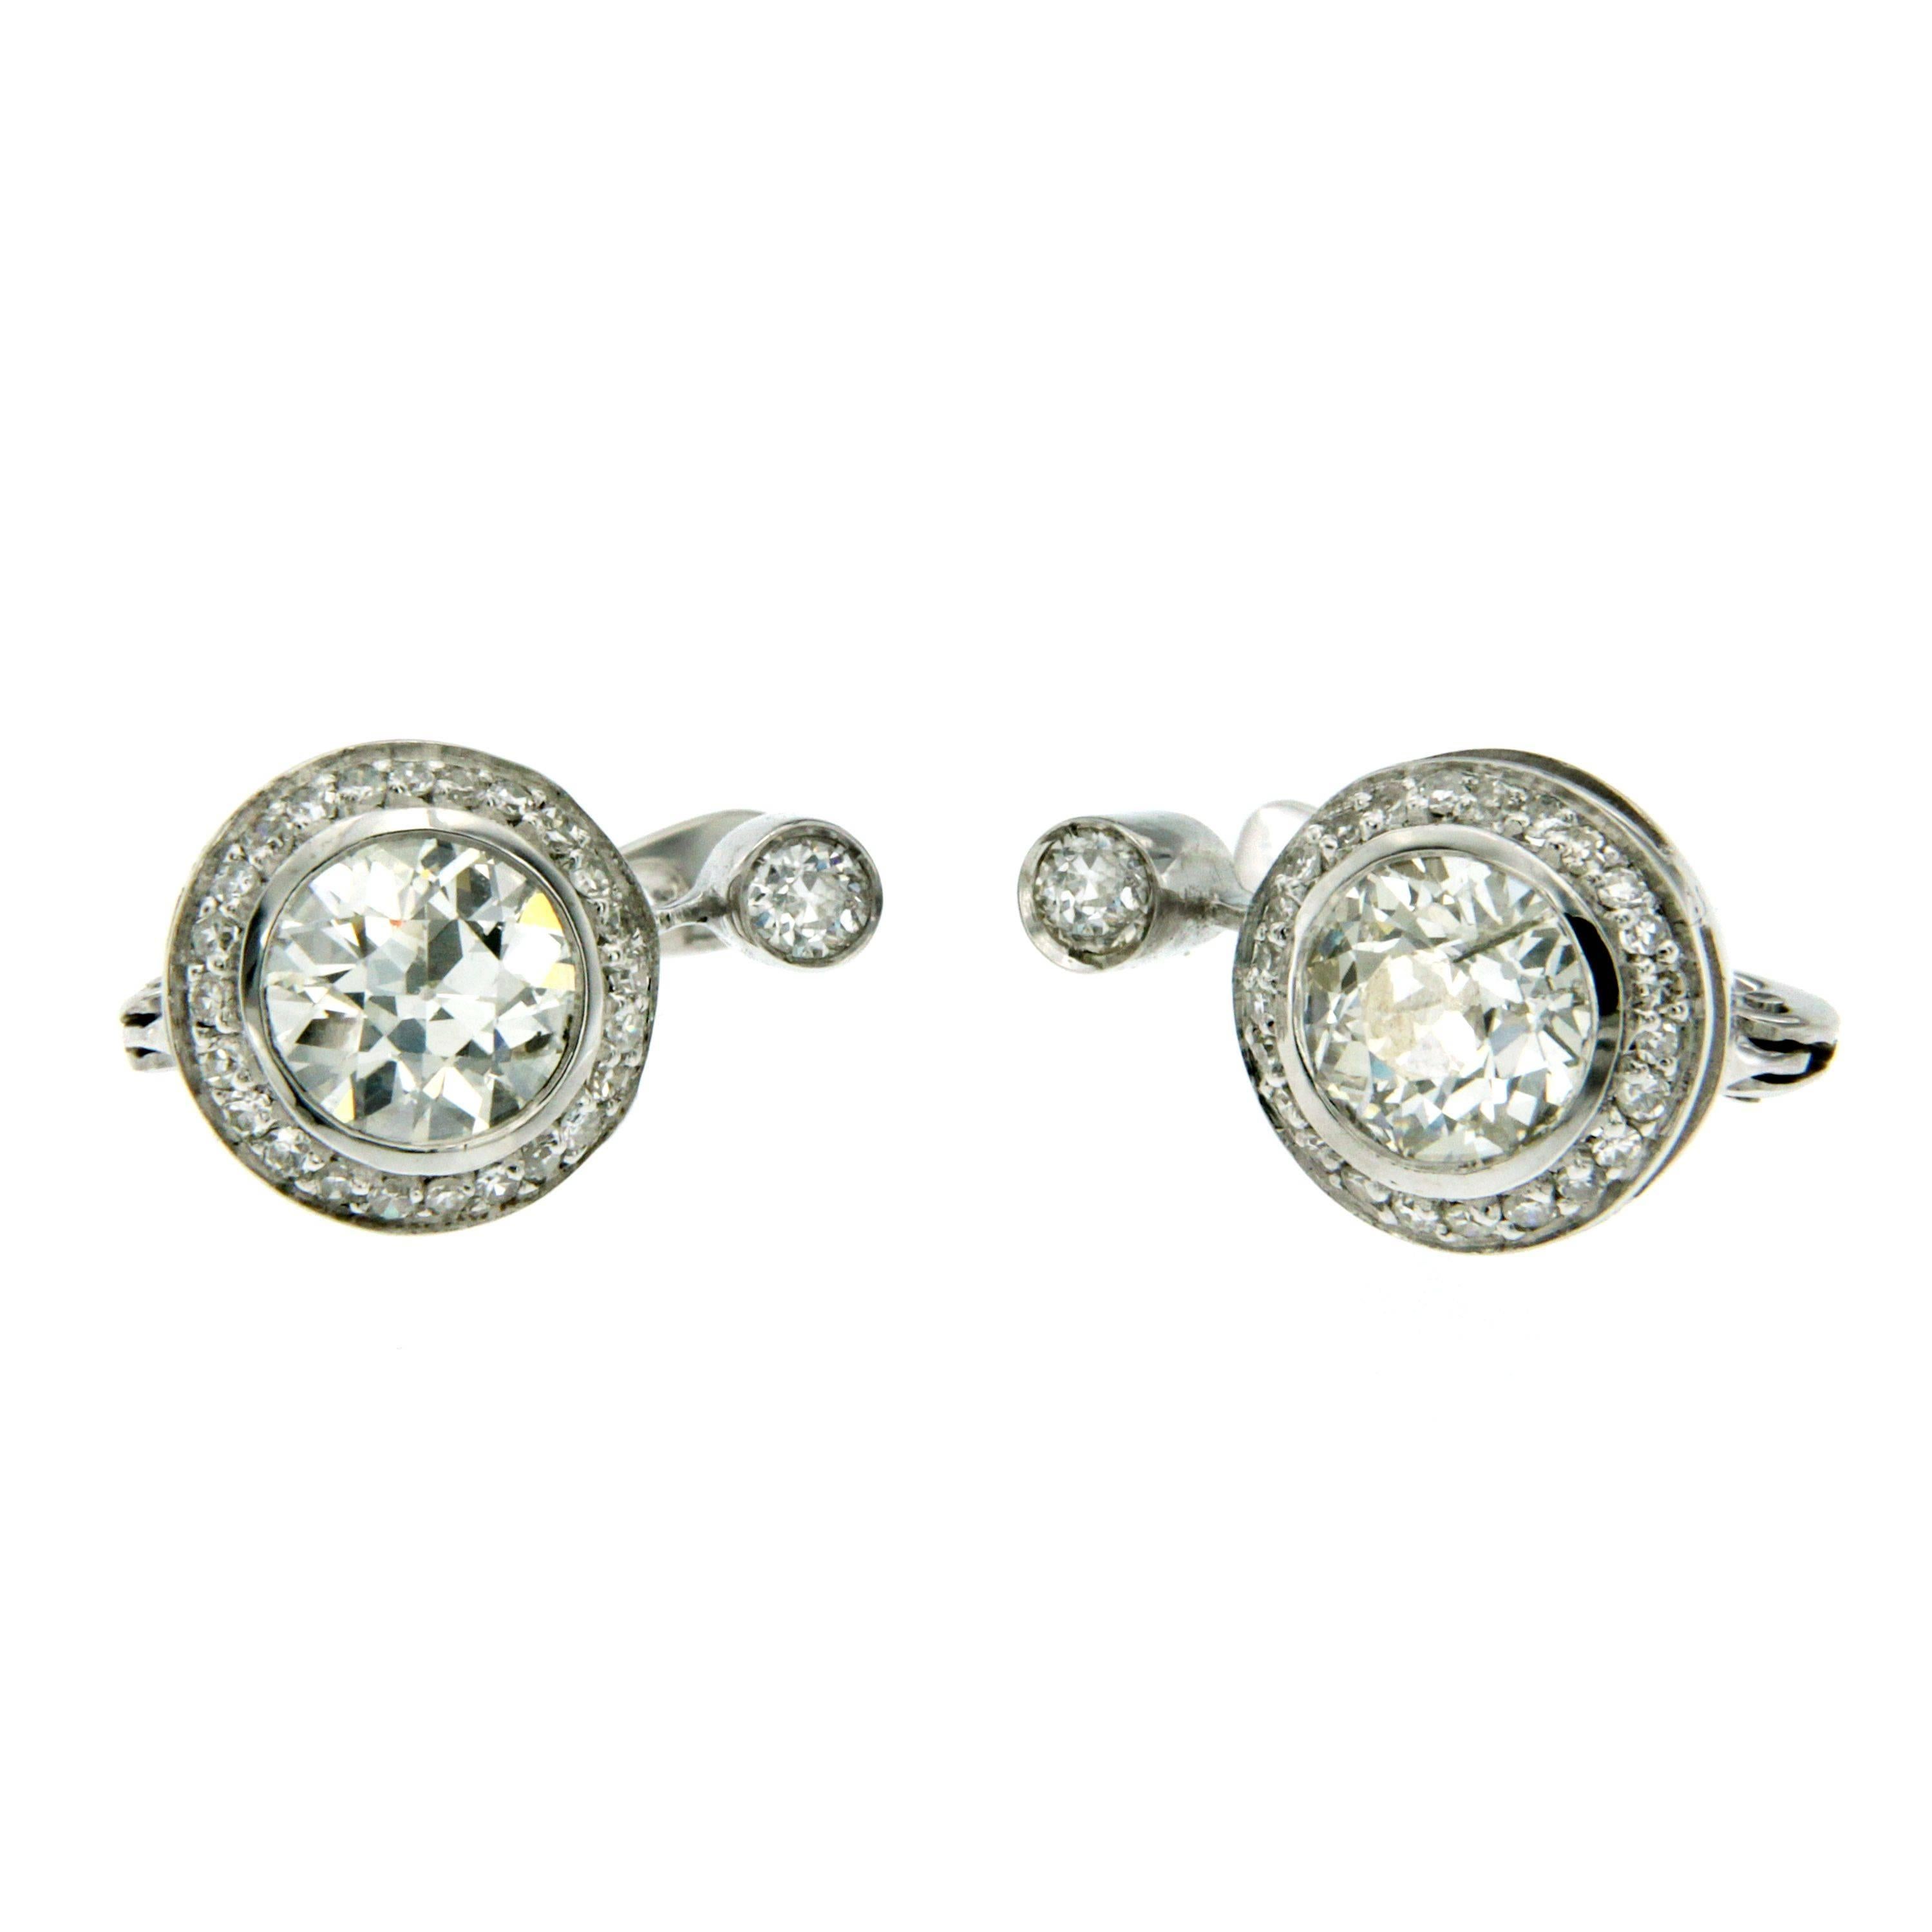 18k white Gold drop earrings consisting of 2 Old mine cut diamonds having a total weight of approximately 1,80 carats I color P  clarity, combined and topped with 0.20 carats of old mine cut diamonds G-H color; all surrounded by small brilliant cut